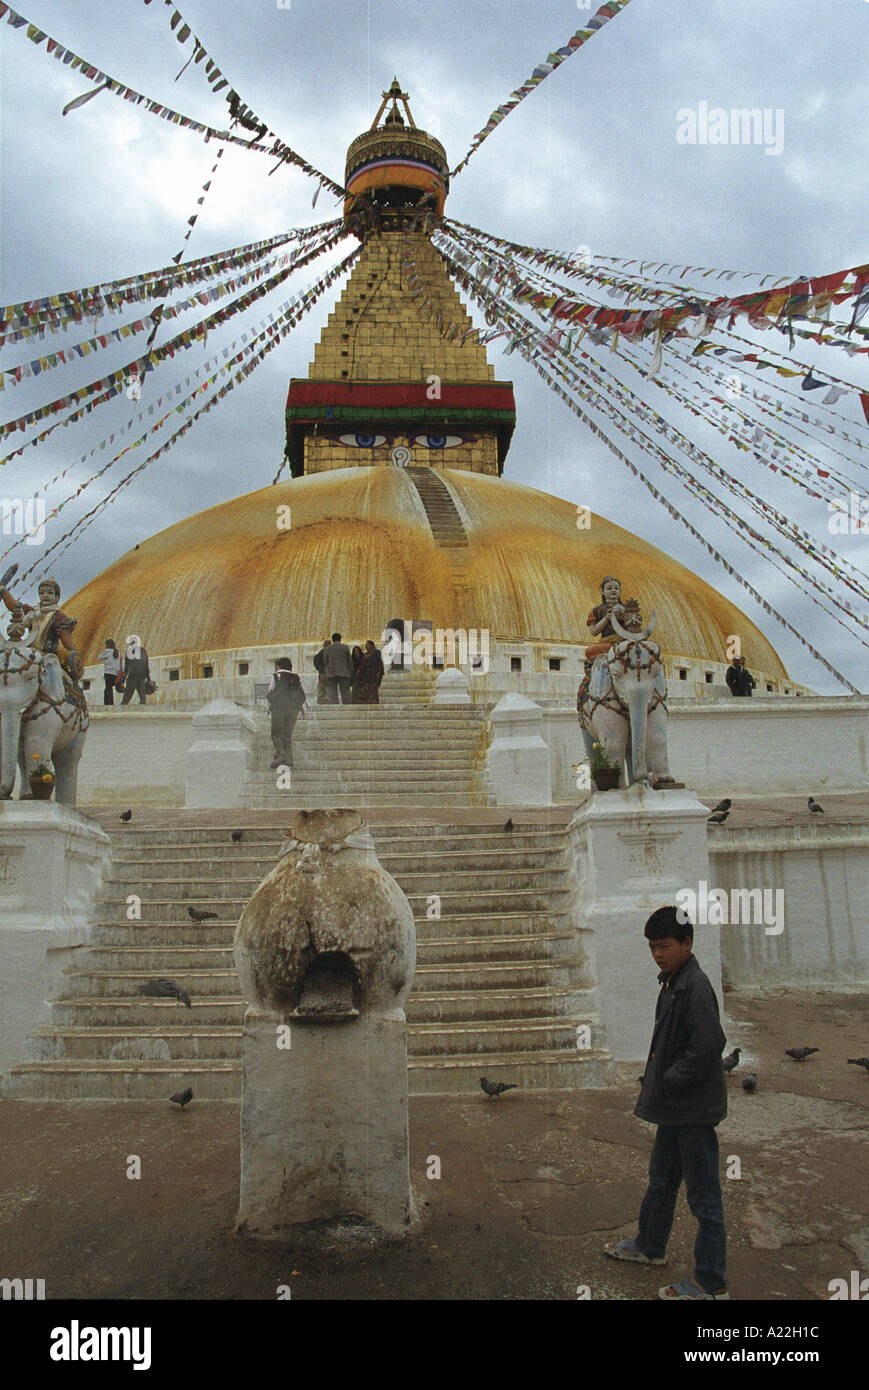 Nepal 2005 the Bodnath Stupa which is one of the largest Stupa in Asia is a site of pilgramage for Buddhist pilgrims from all o Stock Photo